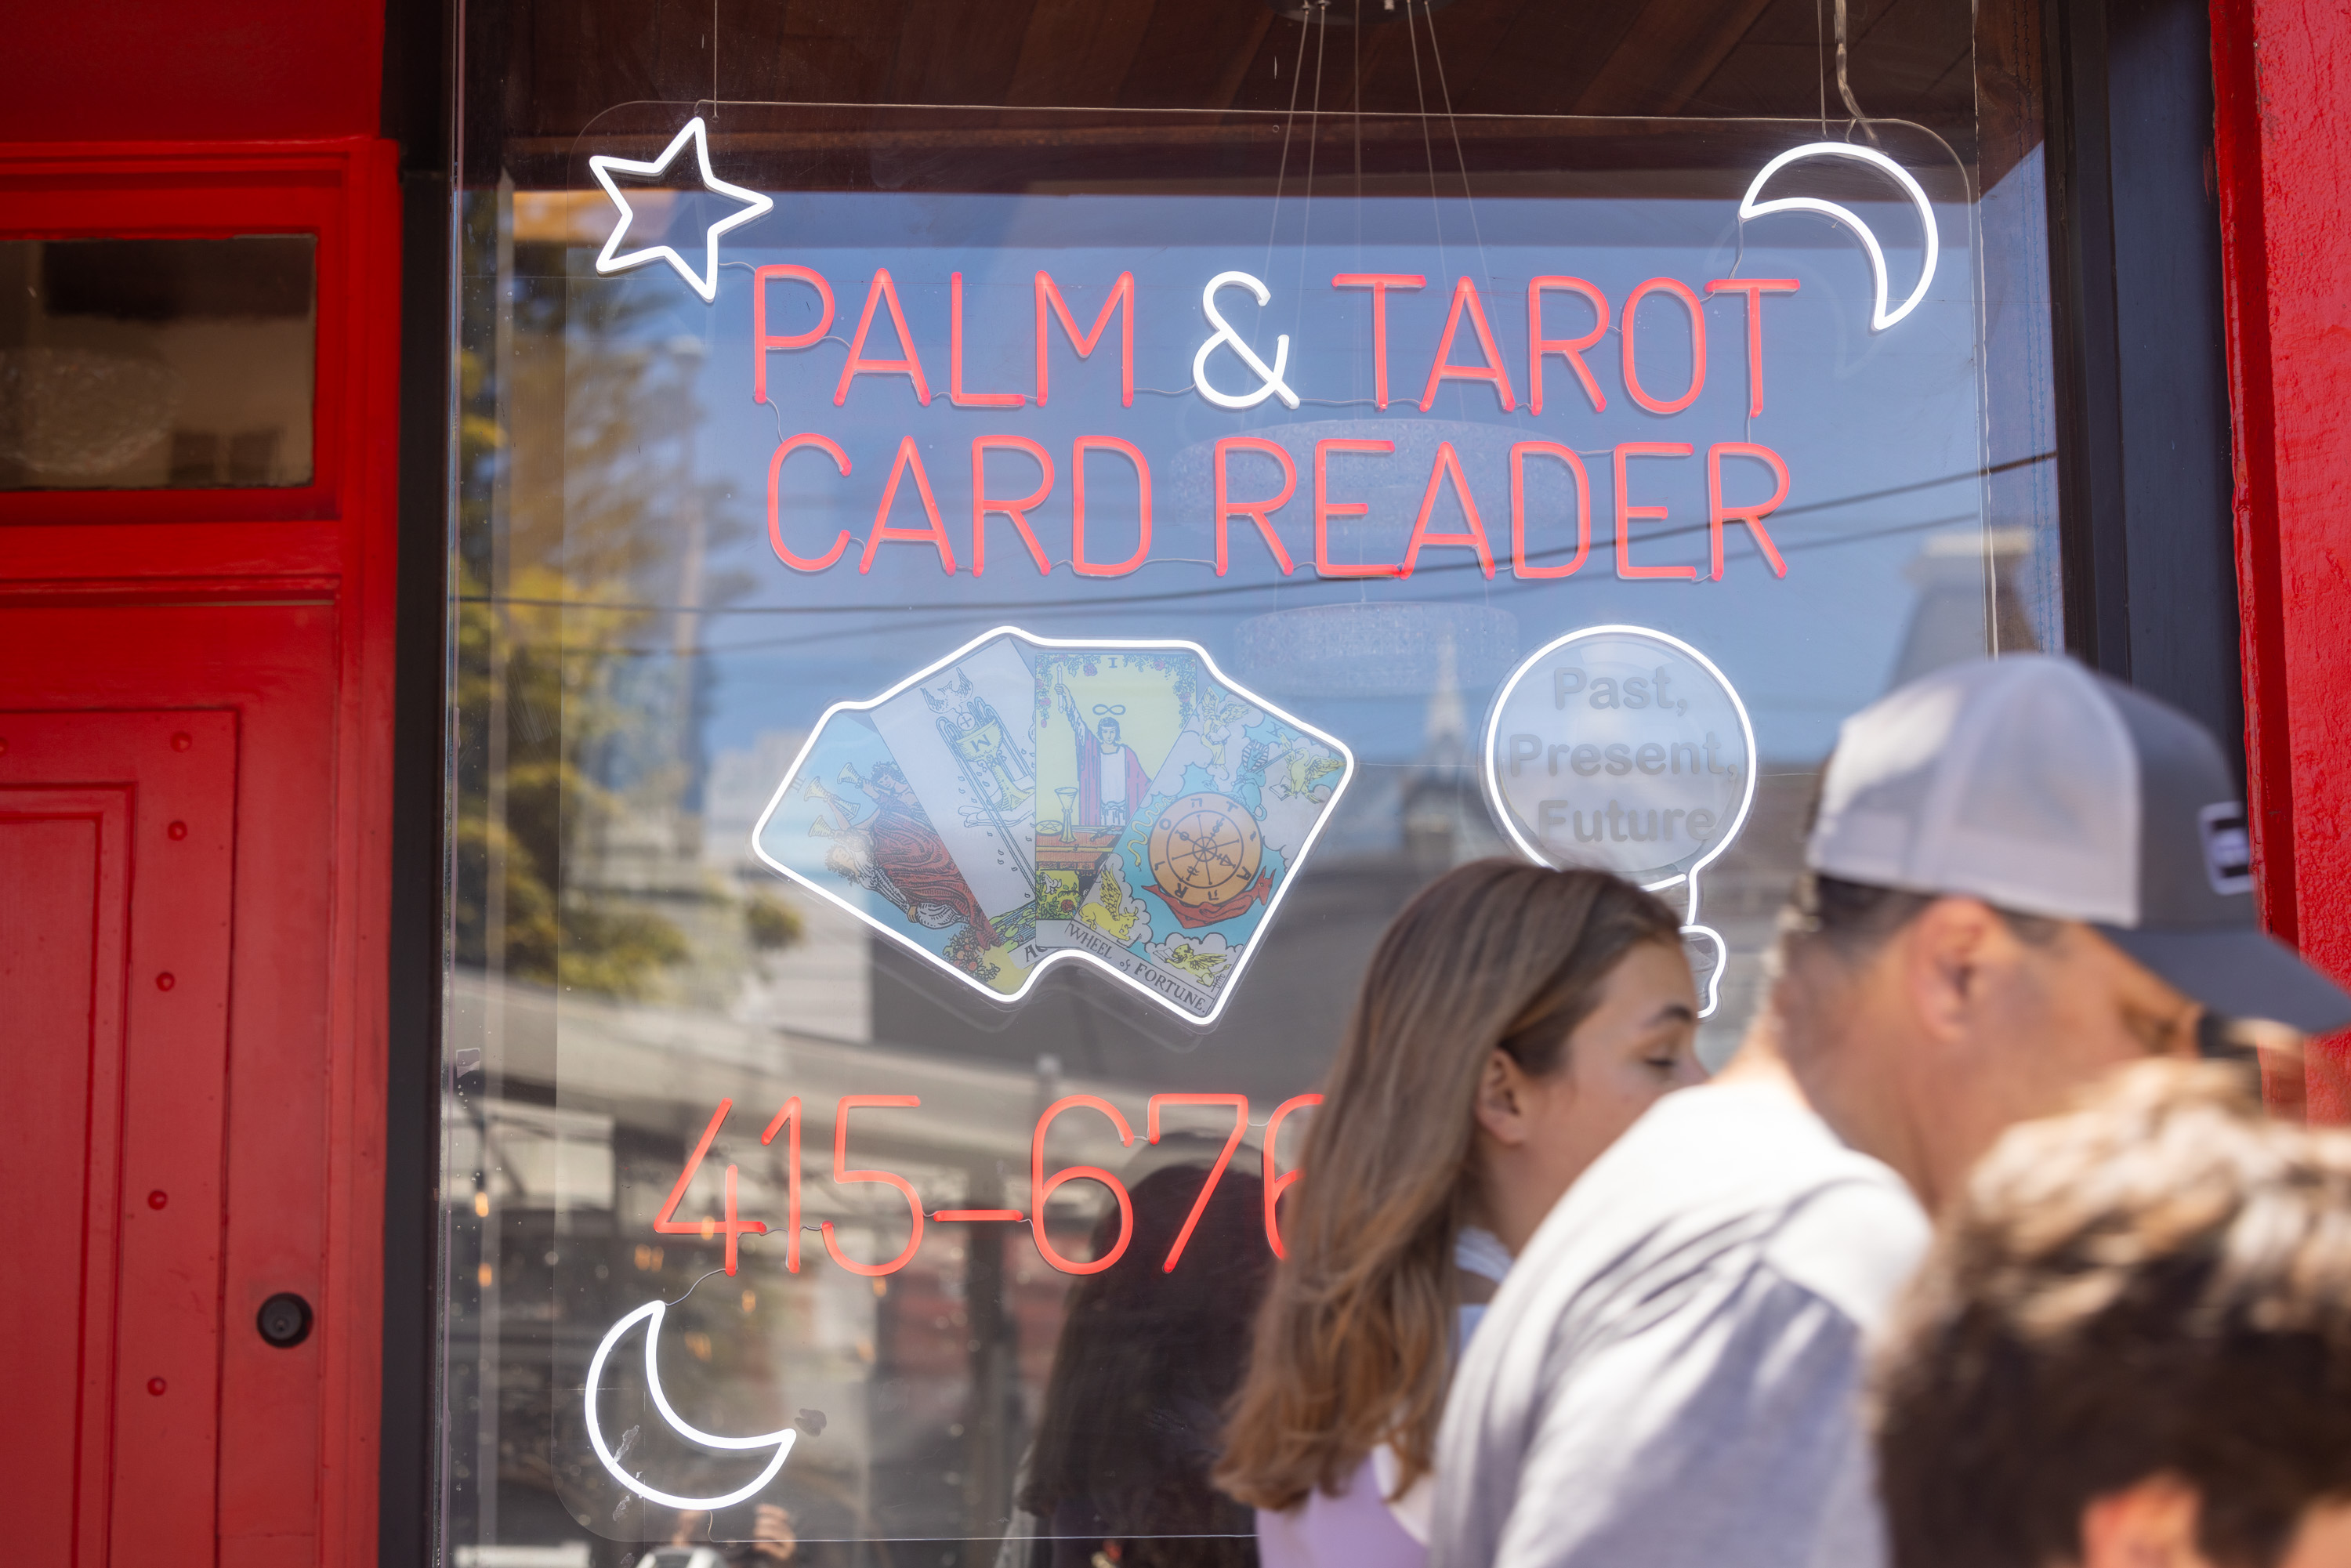 A neon sign advertises &quot;Palm &amp; Tarot Card Reader&quot; with tarot cards, a star, and a crescent moon. The text &quot;Past, Present, Future&quot; and a phone number are also visible.